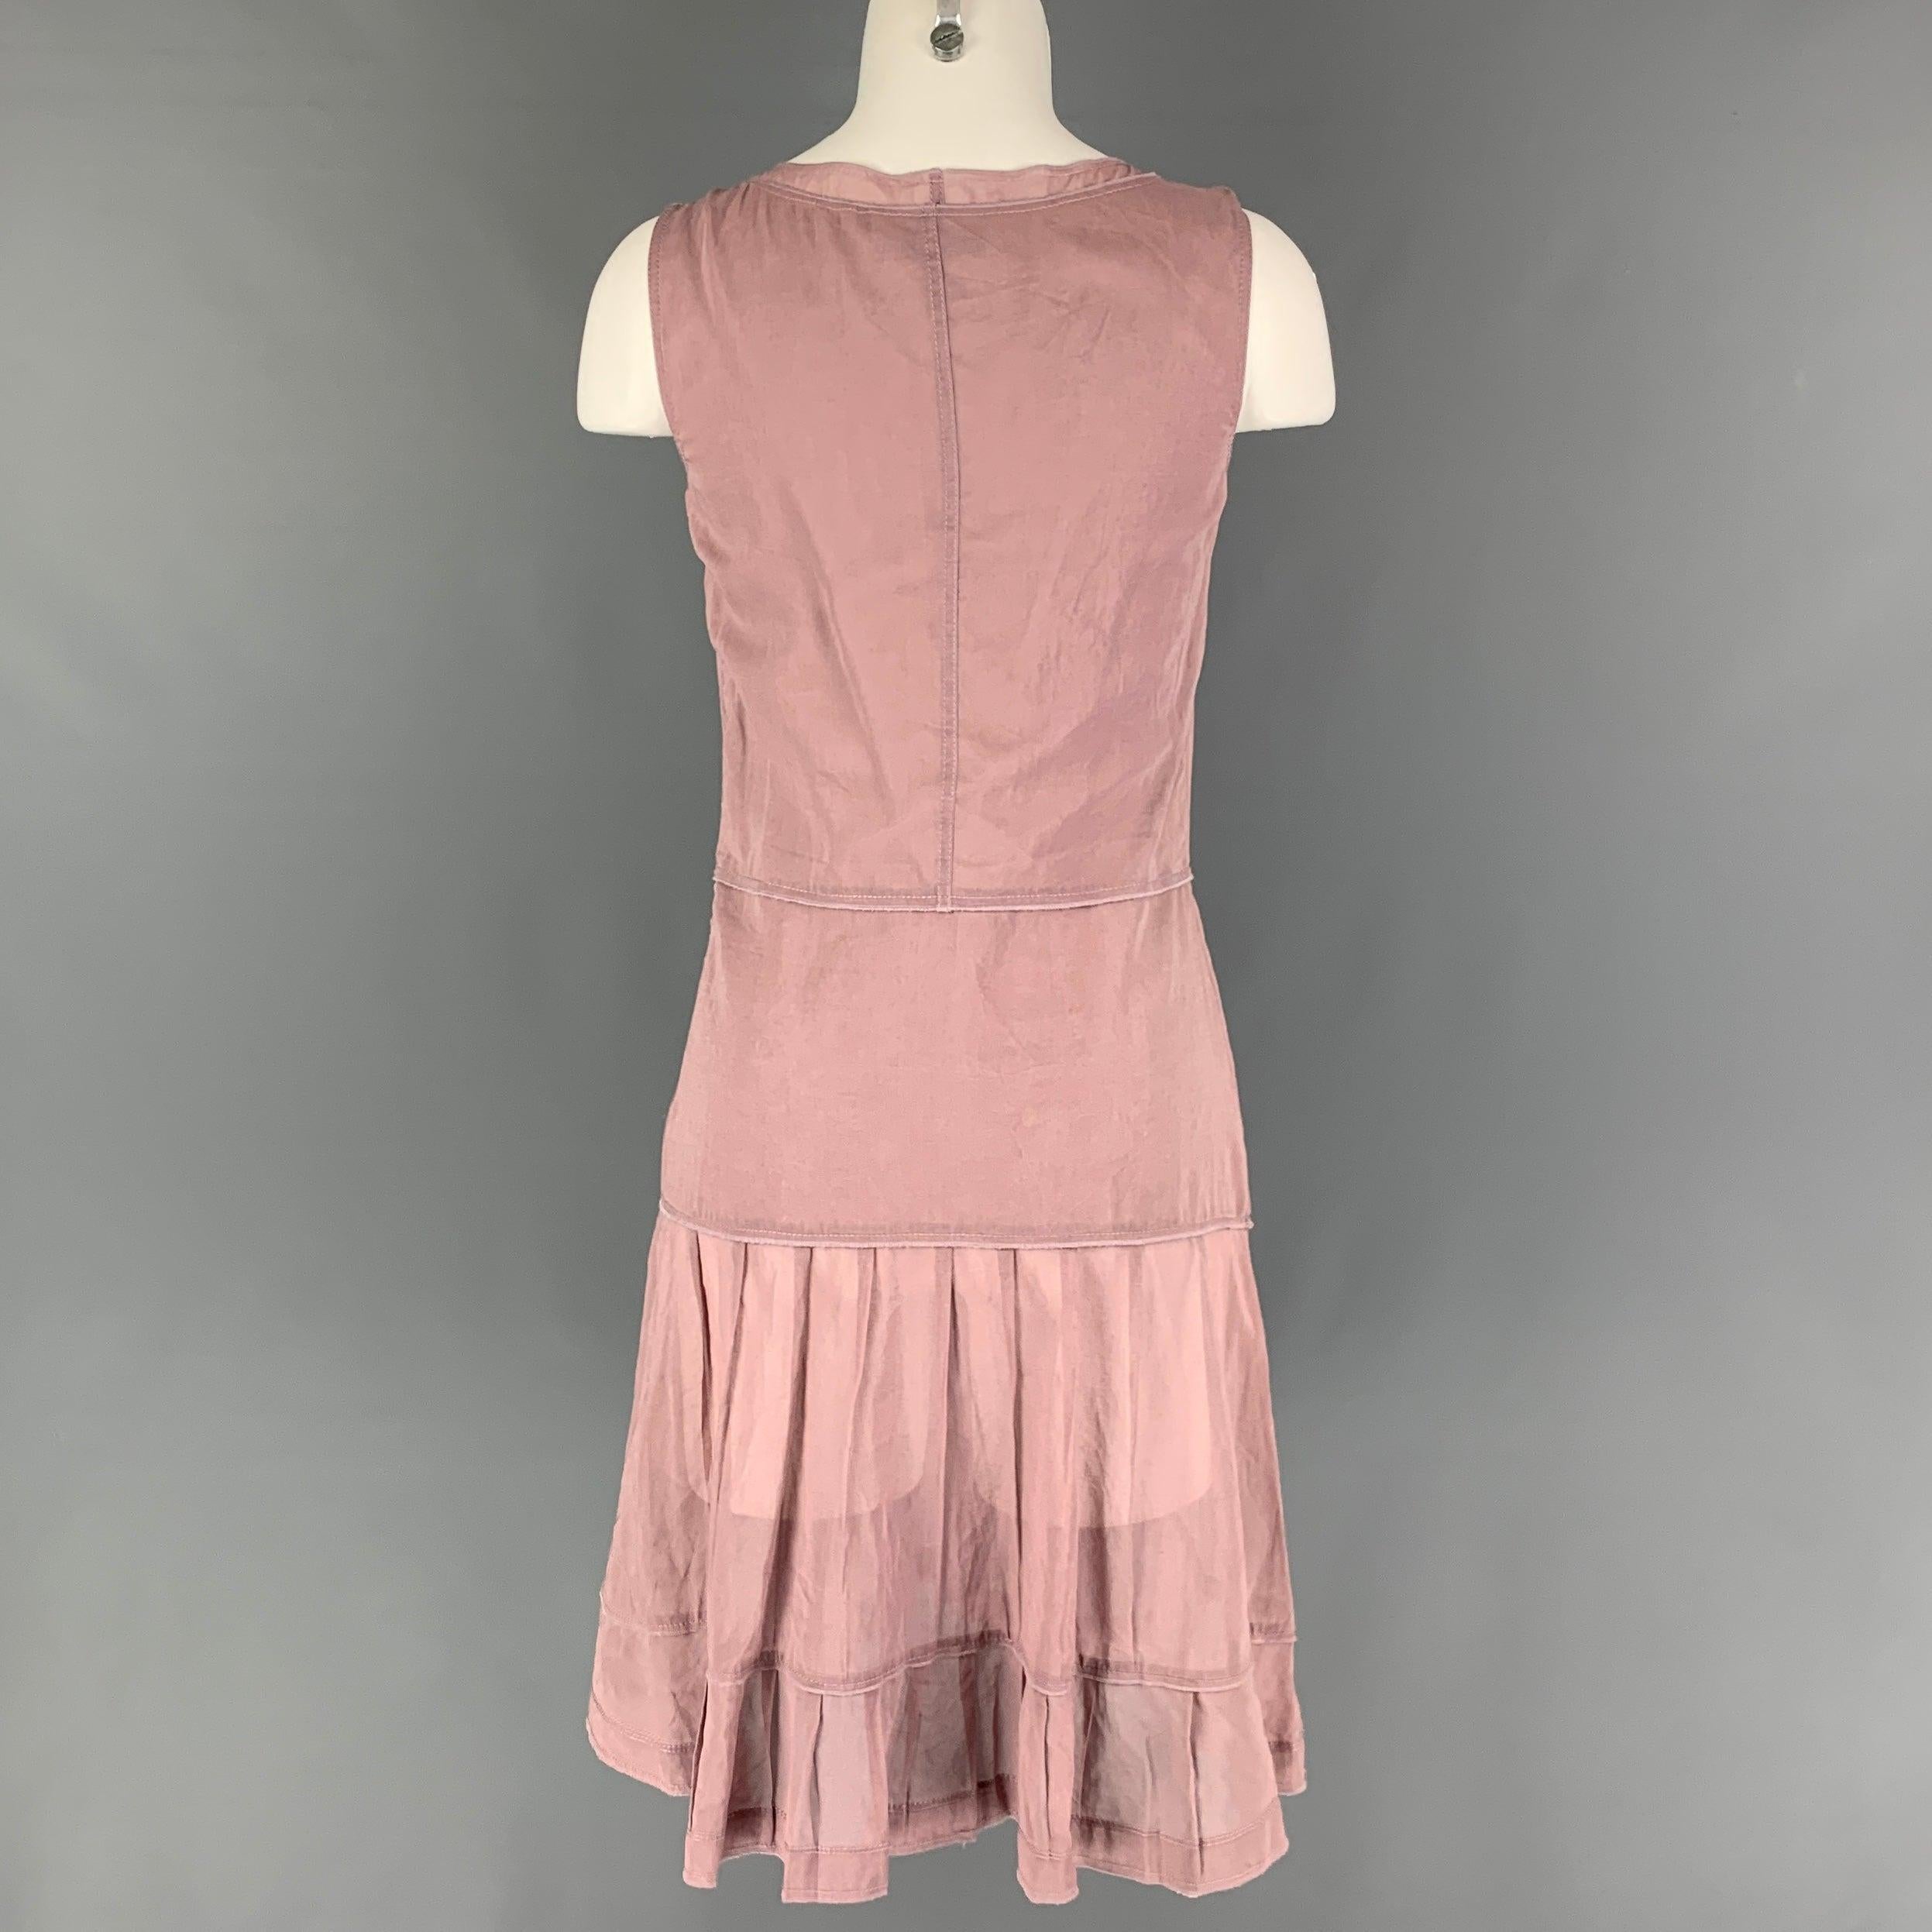 JIL SANDER Size 6 Dust Pink Cotton Pleated Sleeveless Dress In Good Condition For Sale In San Francisco, CA